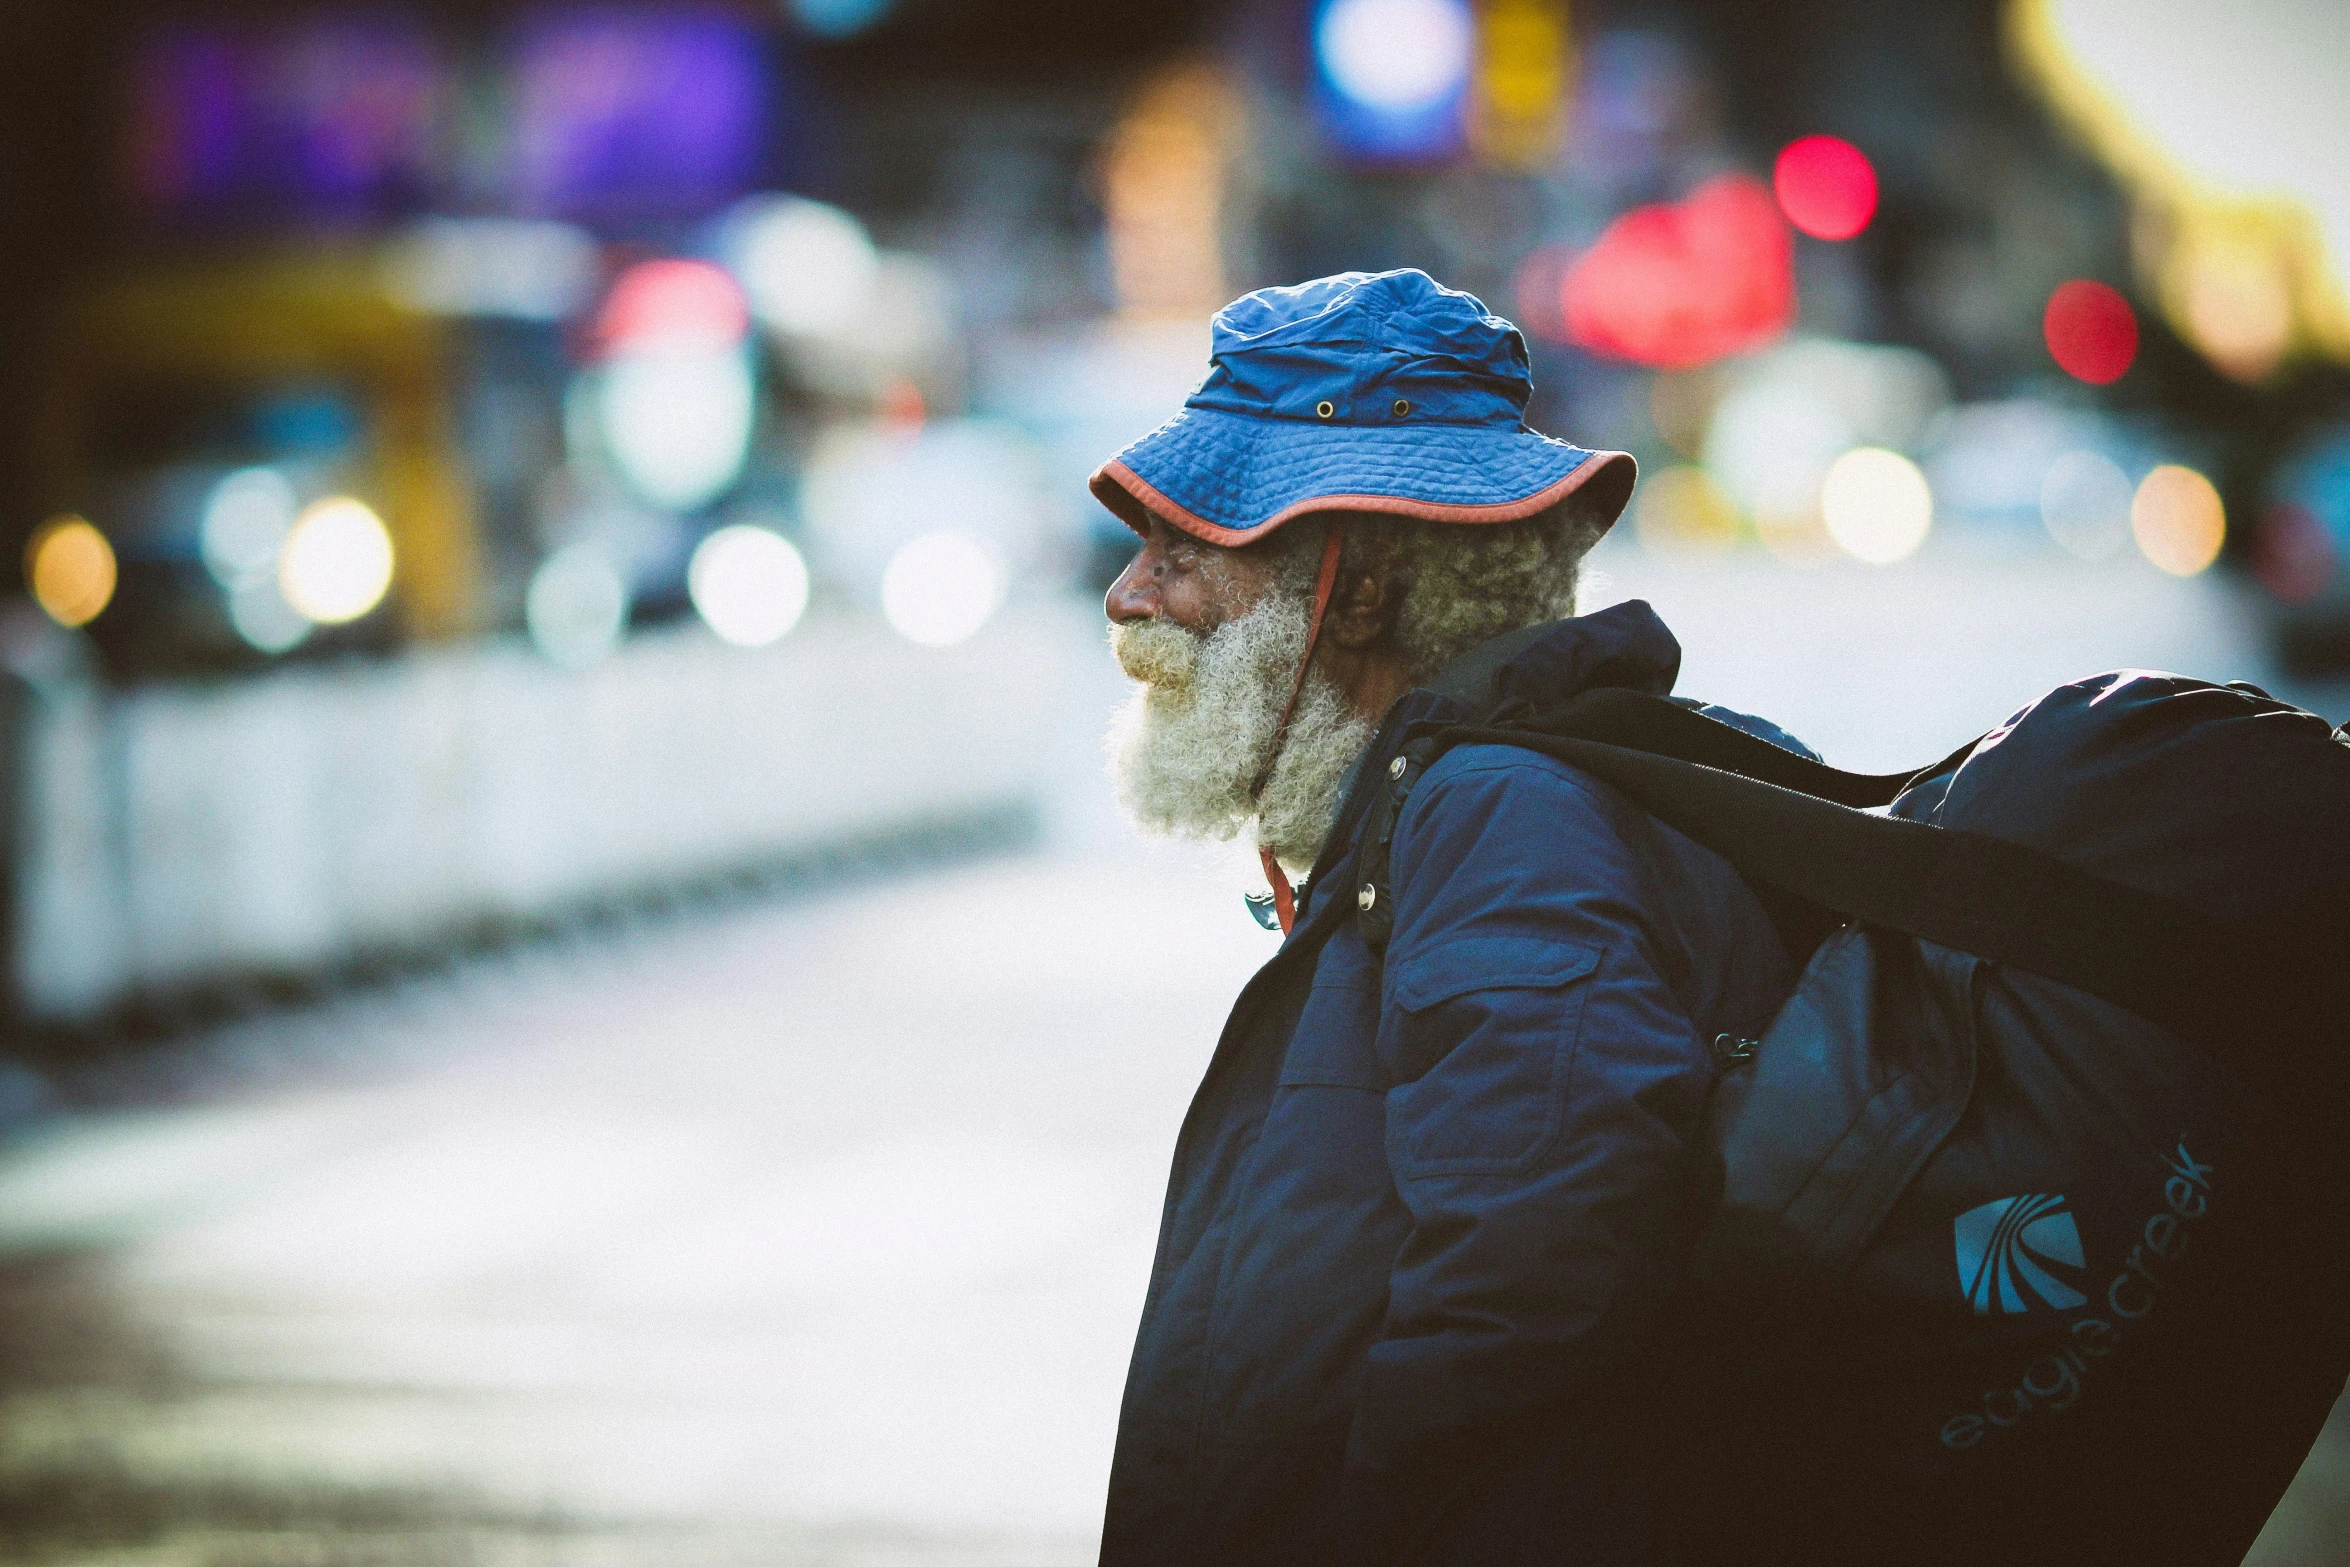 bearded homeless man walking with a suitcase